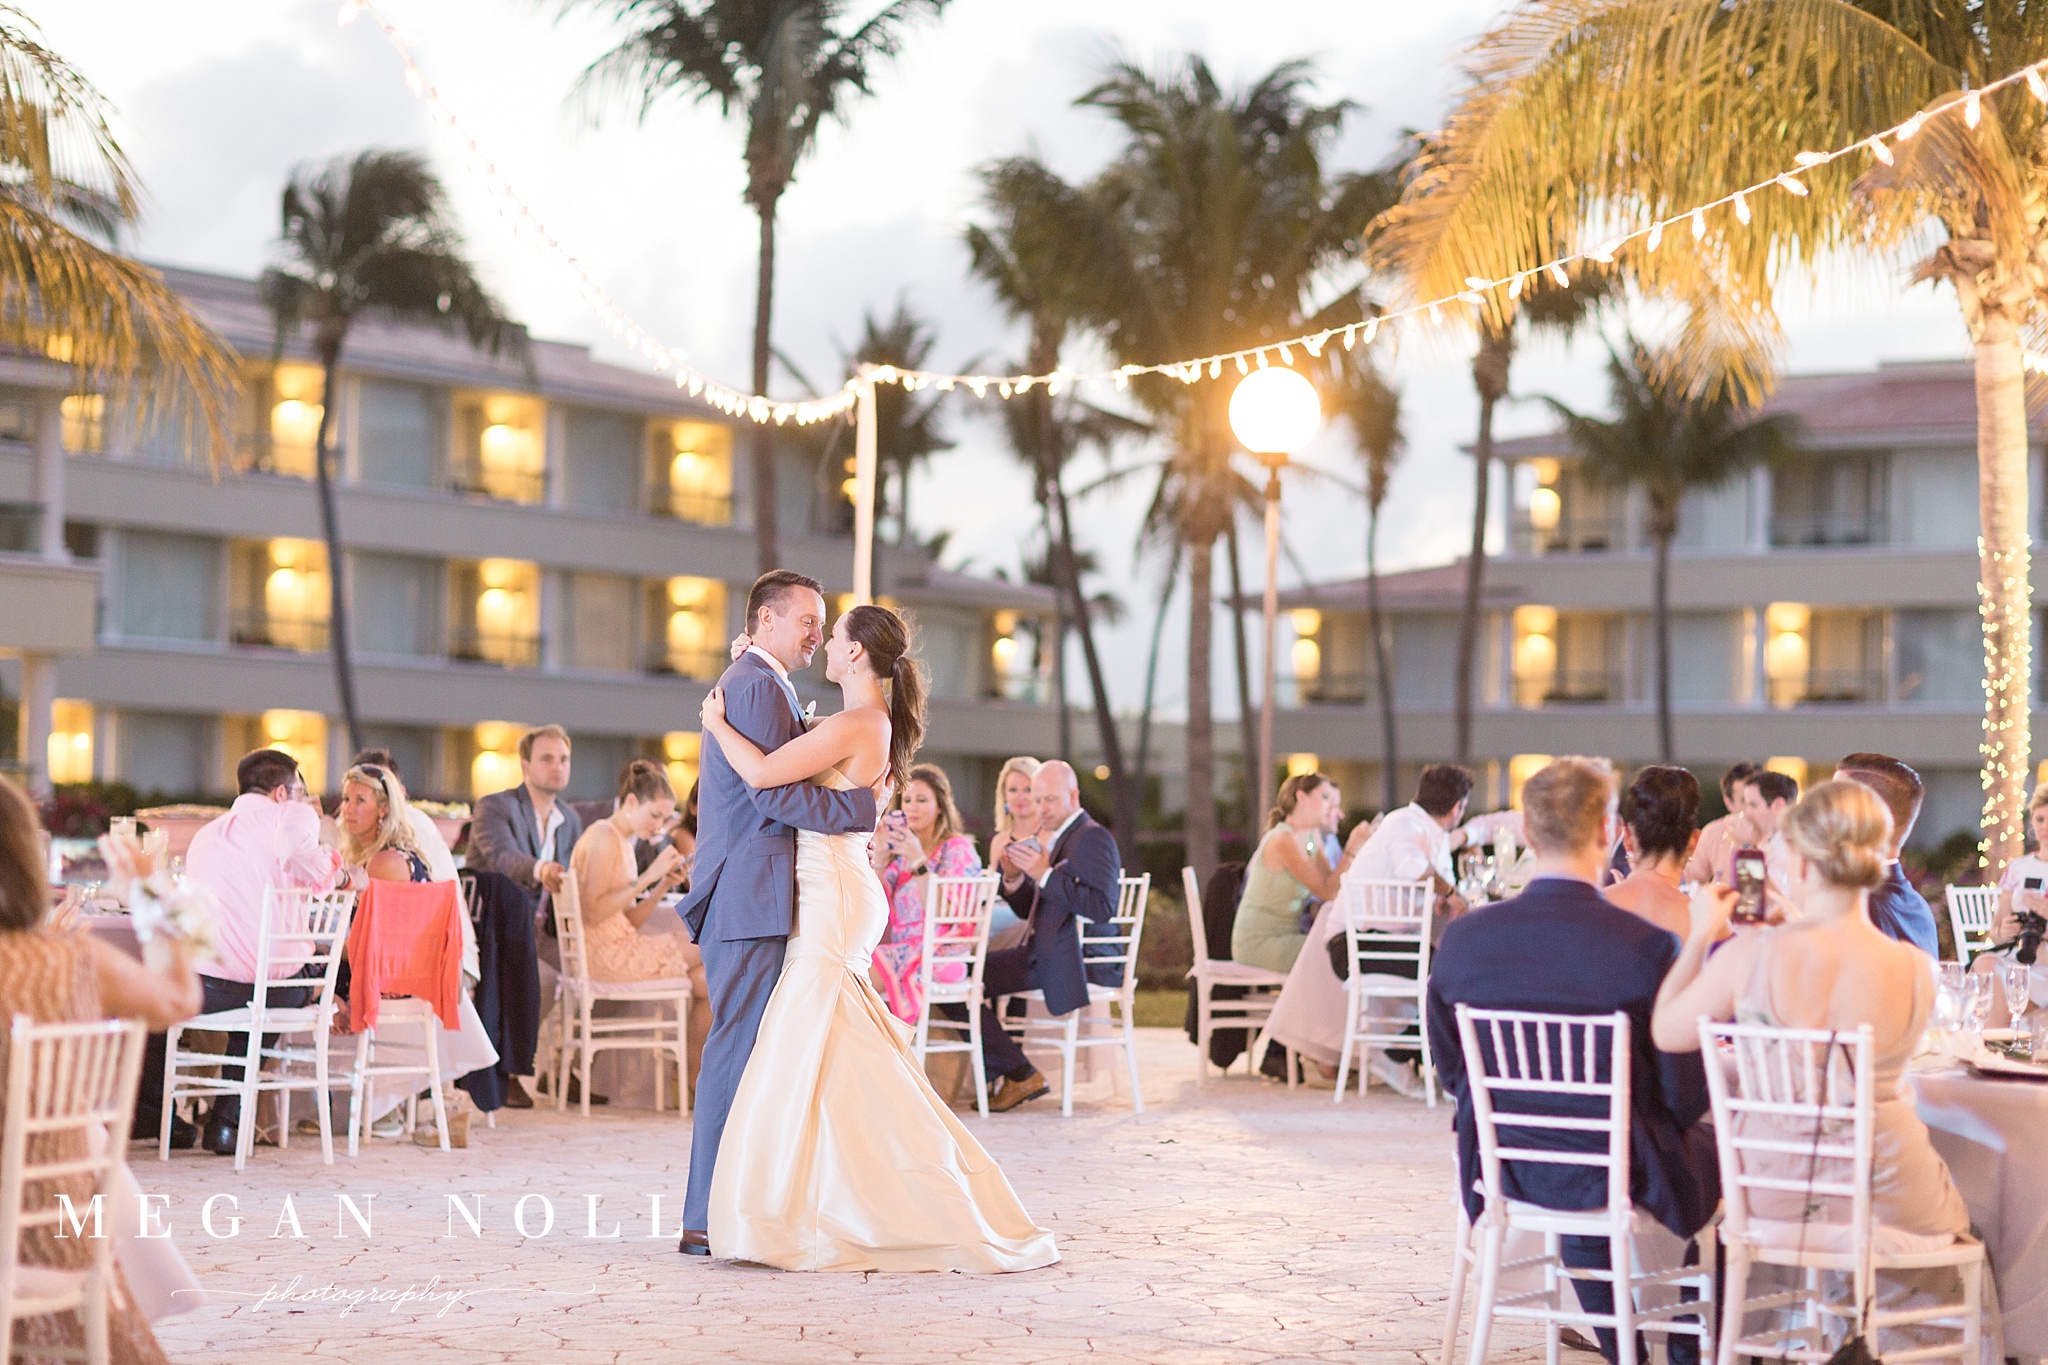 Black and White Bail Out, Lighting outdoor receptions, Cancun Wedding